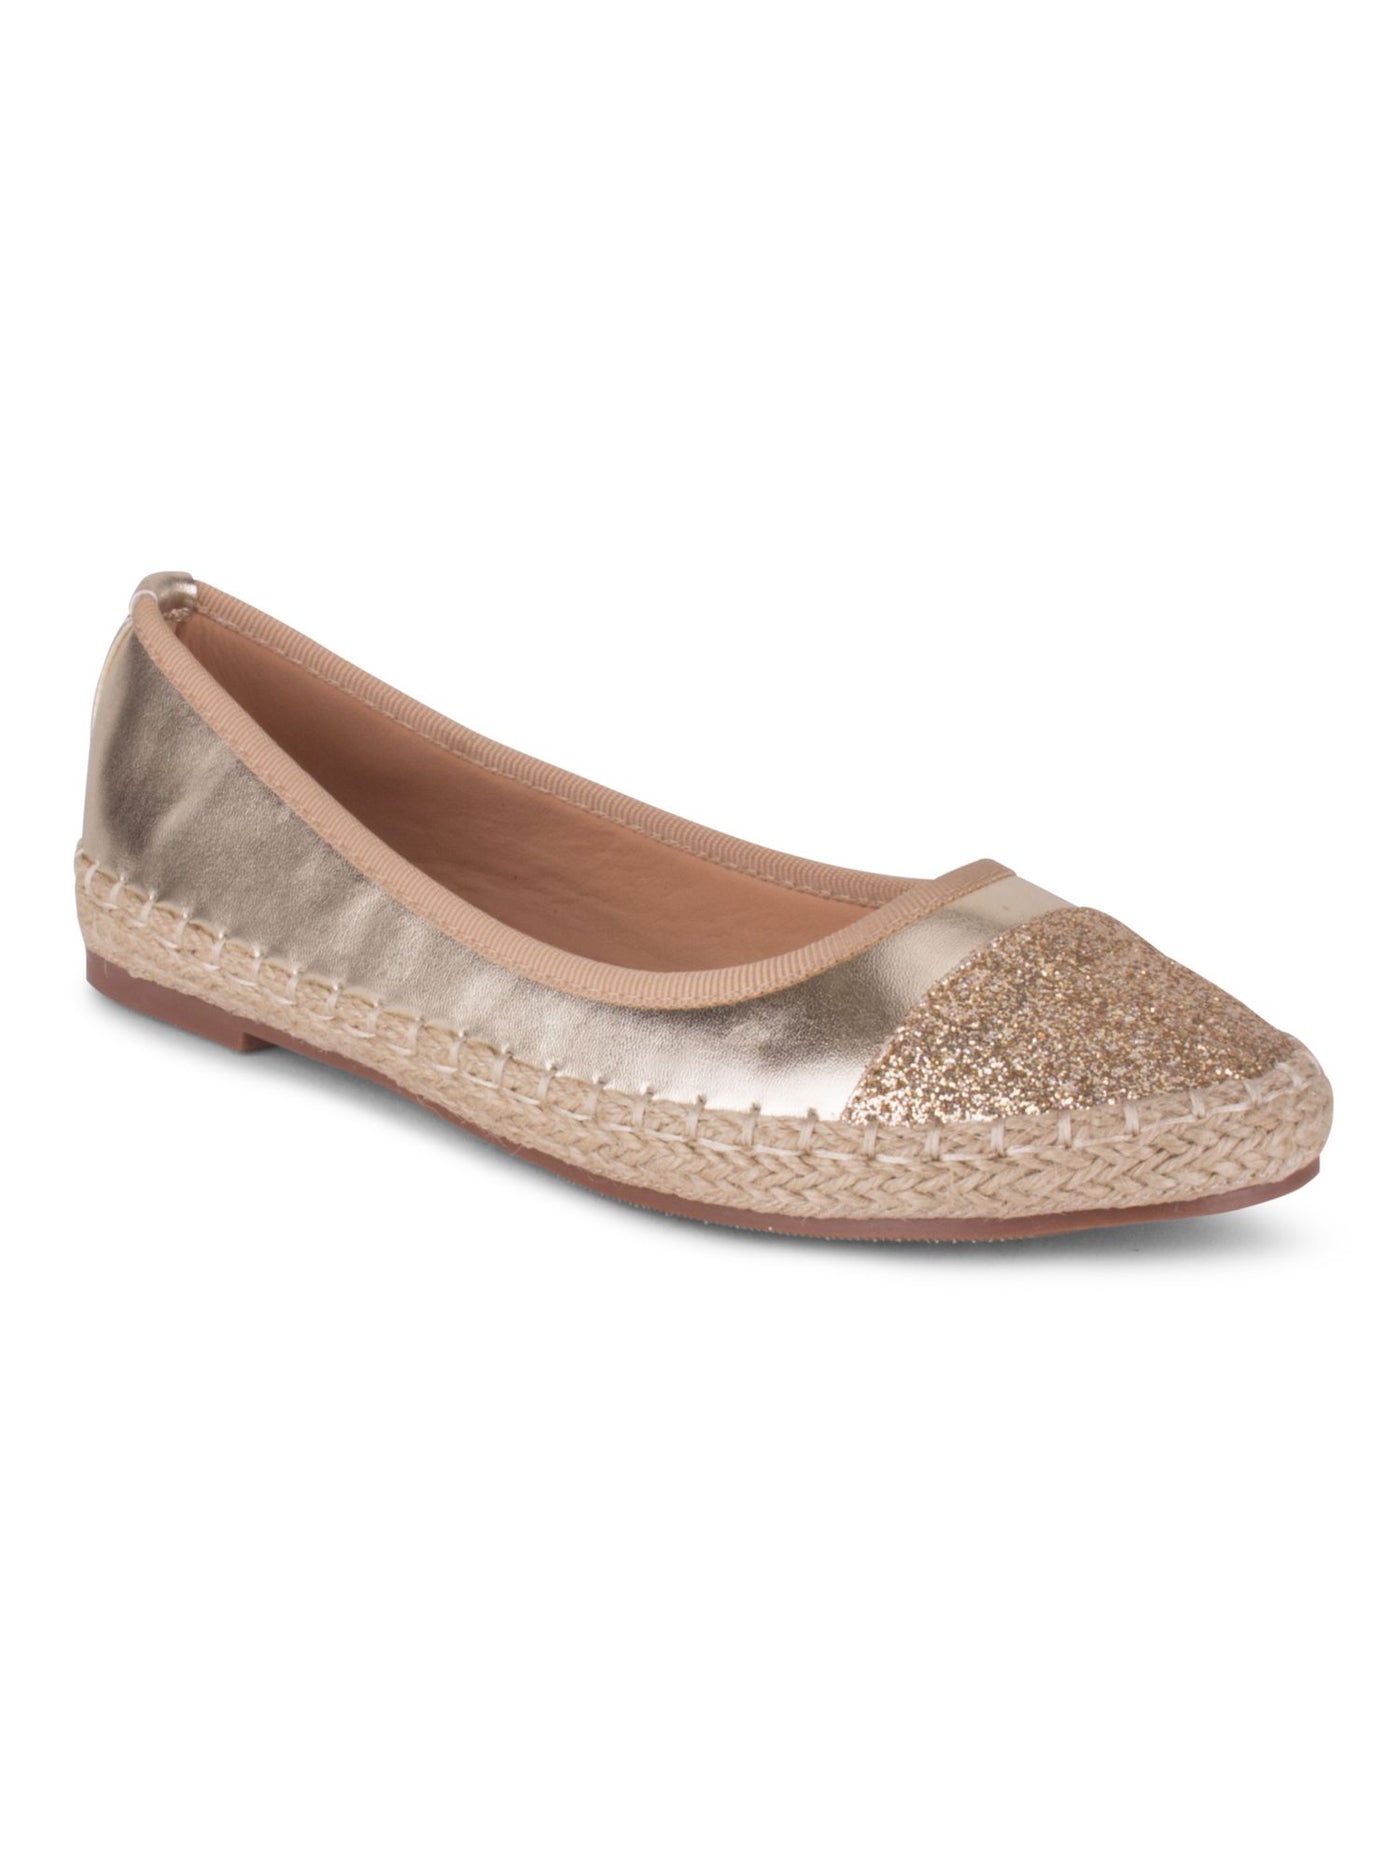 WANTED Womens Gold Glitter Padded Zeal Round Toe Slip On Leather Espadrille Shoes 7.5 M